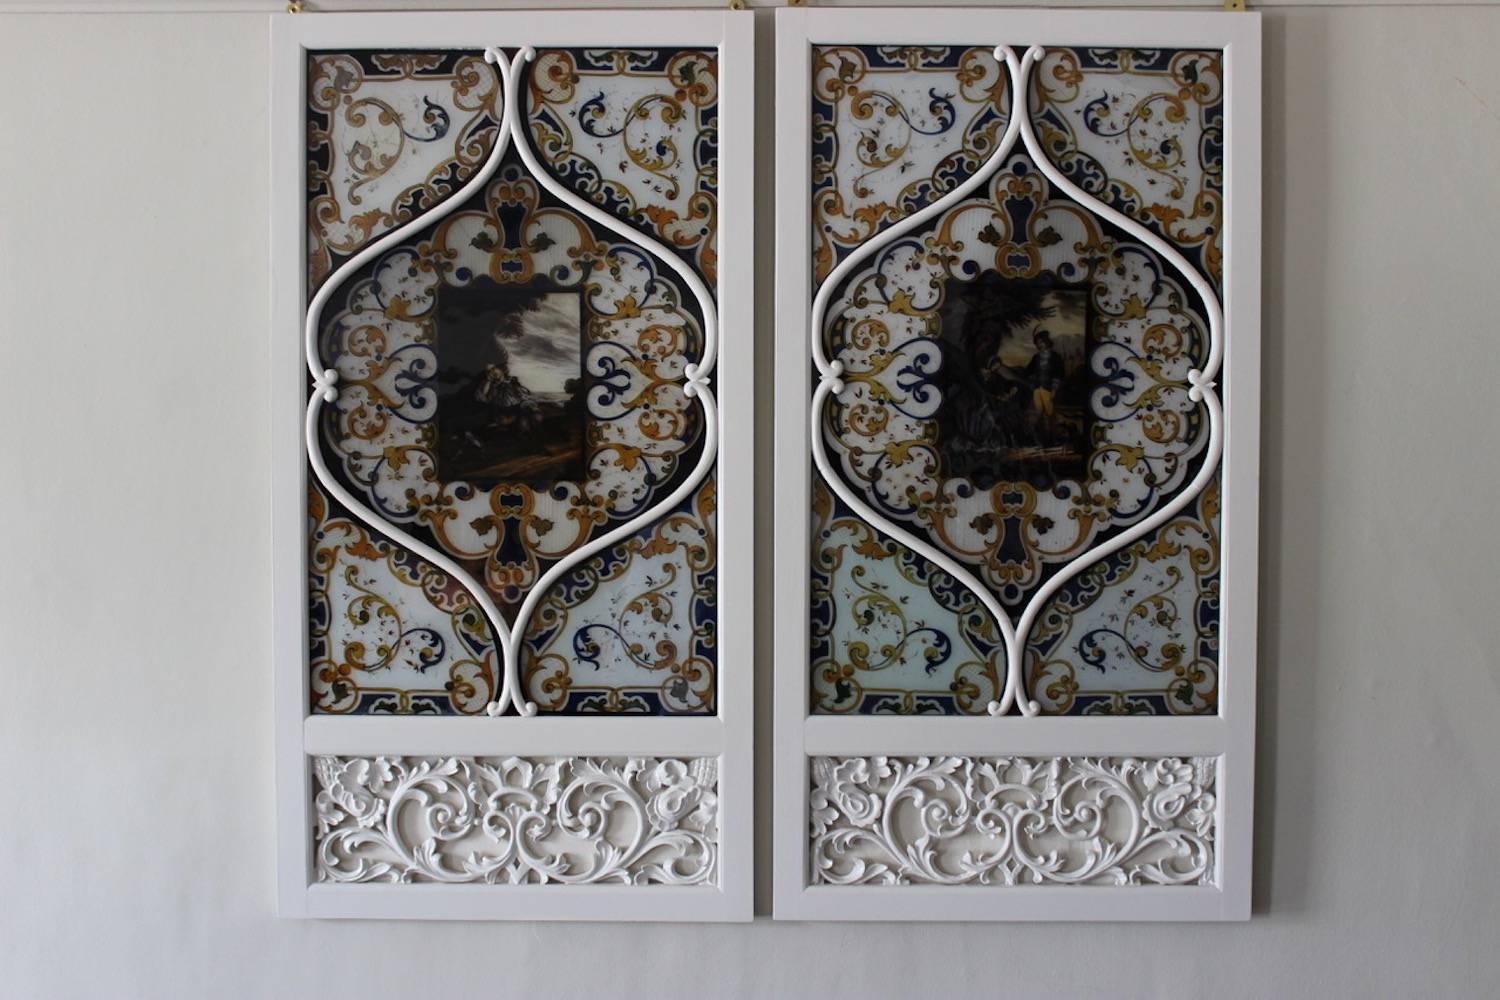 A charming and highly decorative pair of painted glass panels in a historical style, the central cartouche of each depicting a pastoral scene with figures, in pierced and carved white-painted frames (probably originally part of an architectural